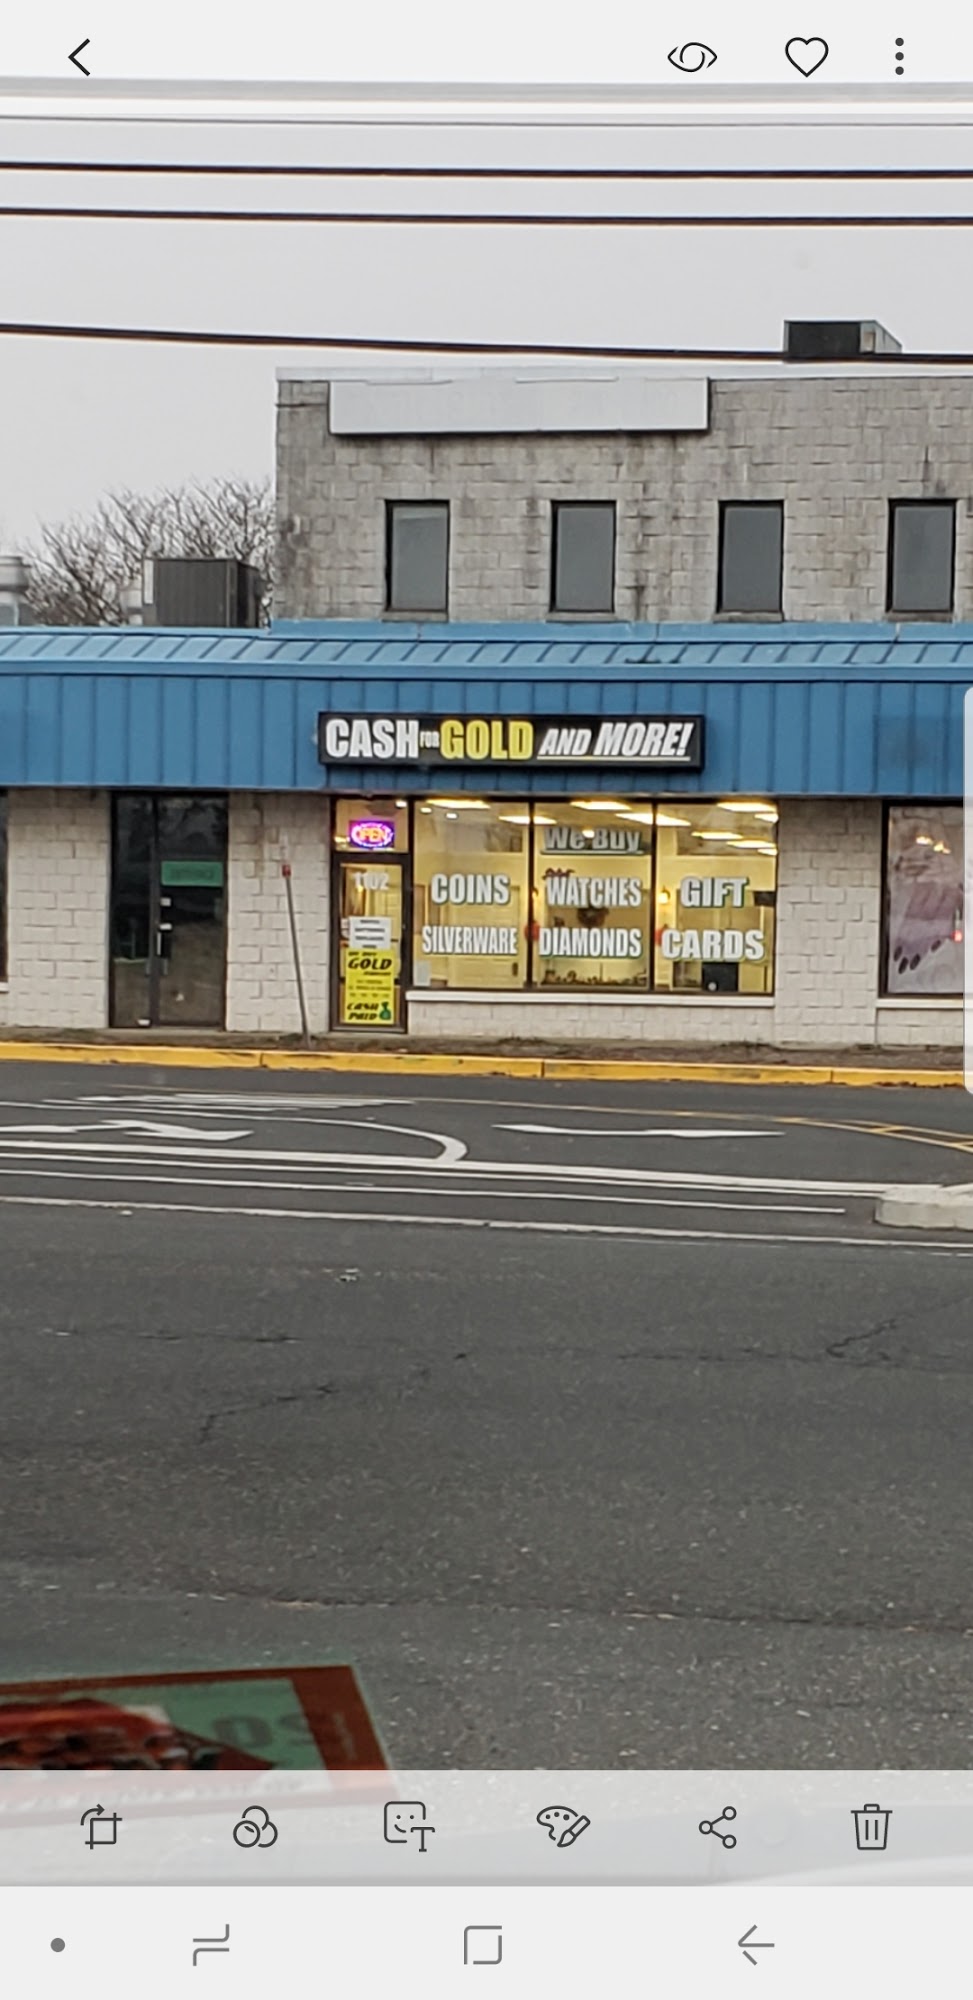 Cash for Gold and More!